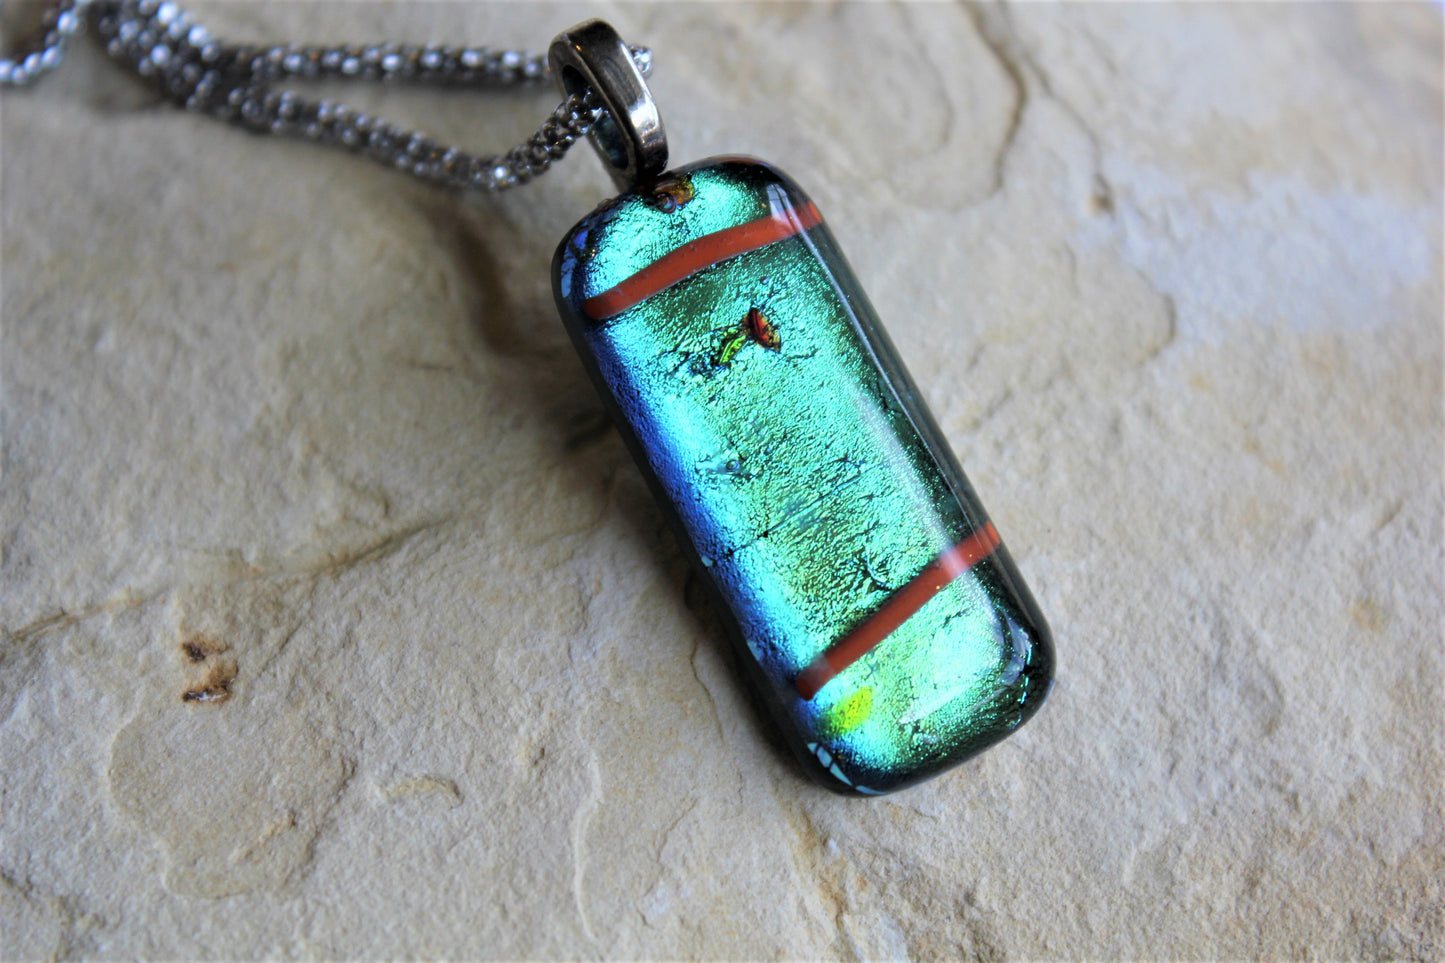 Fused Glass Dichroic Pendant with Chain